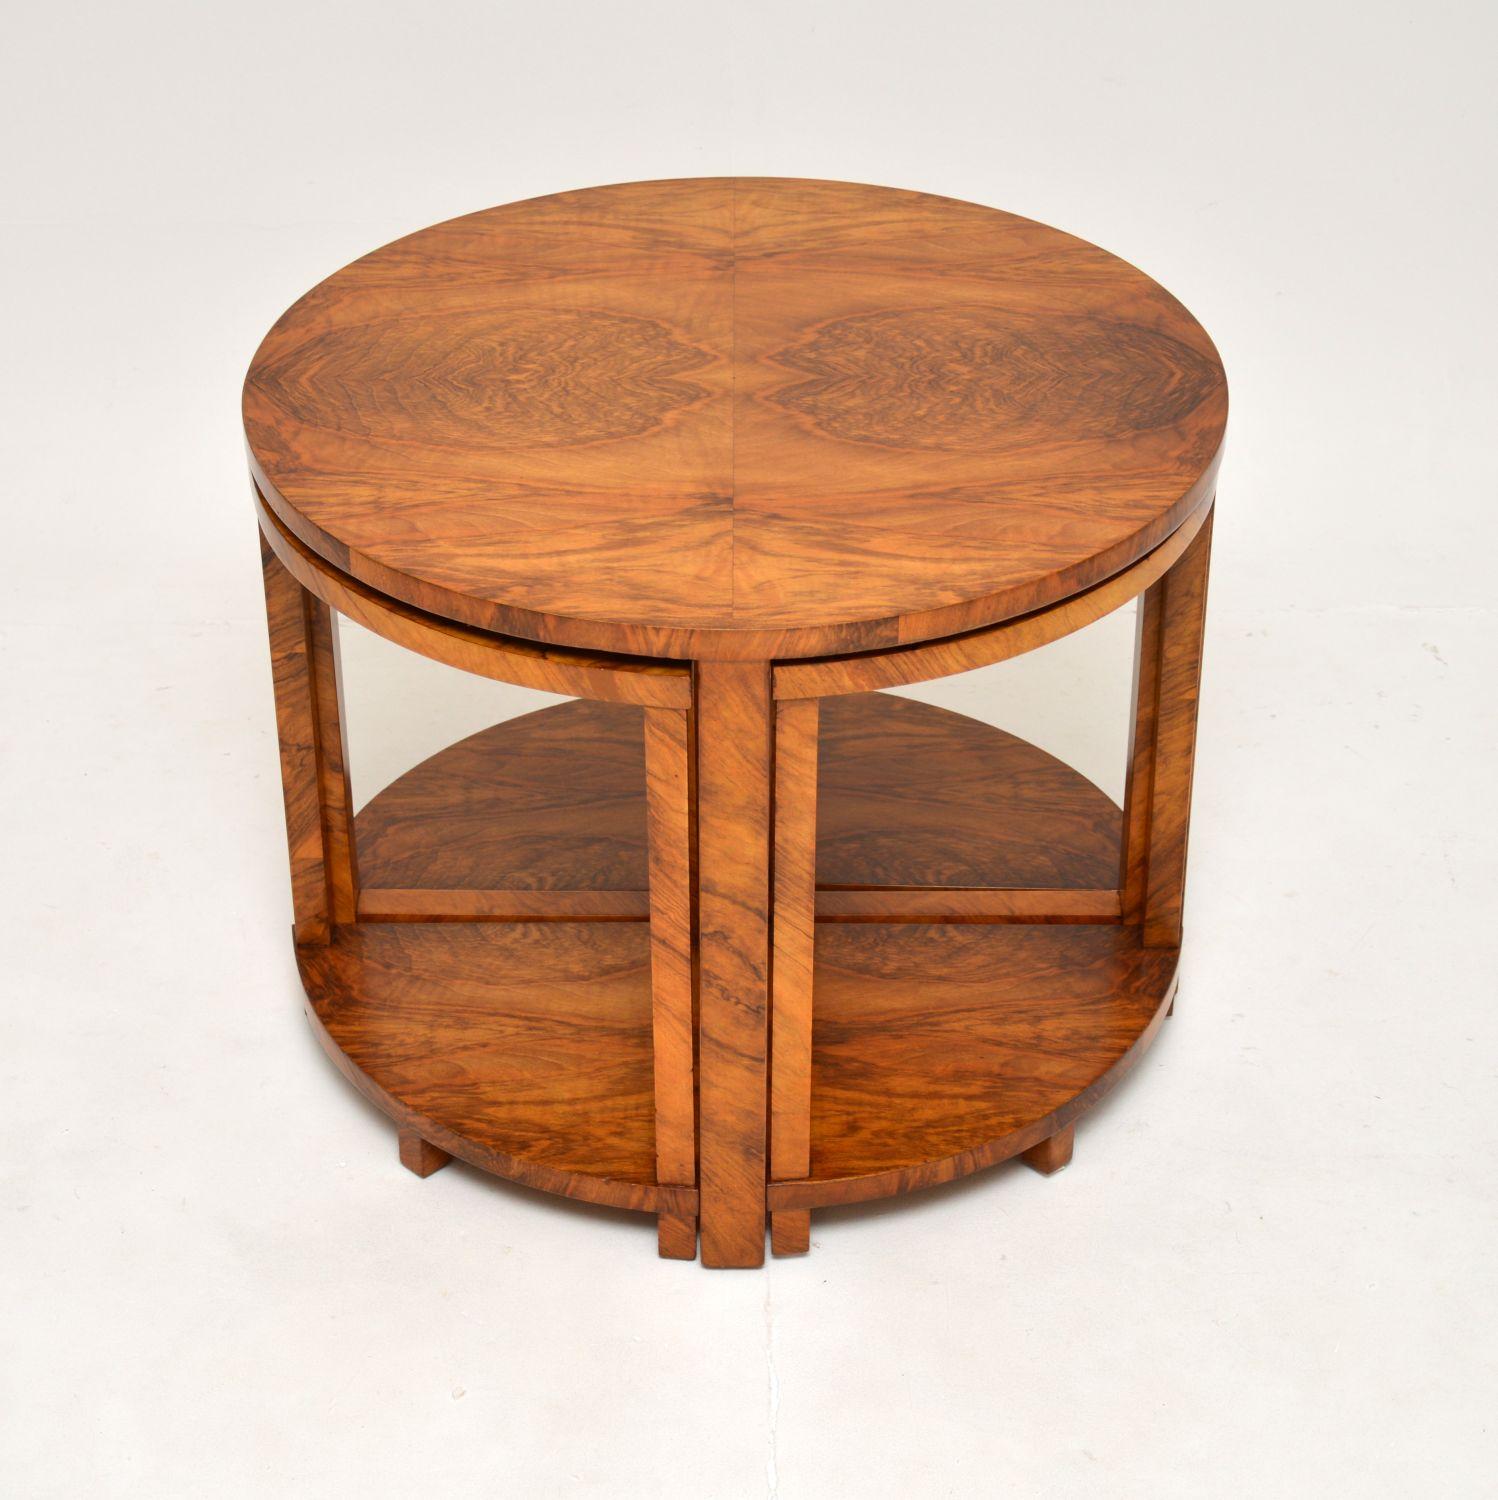 A stylish and extremely well made Art Deco nesting coffee table in walnut. This was made in England, it dates from the 1920’s.

The quality is outstanding, this has a gorgeous design and is very practical. The four smaller pie shaped tables nest